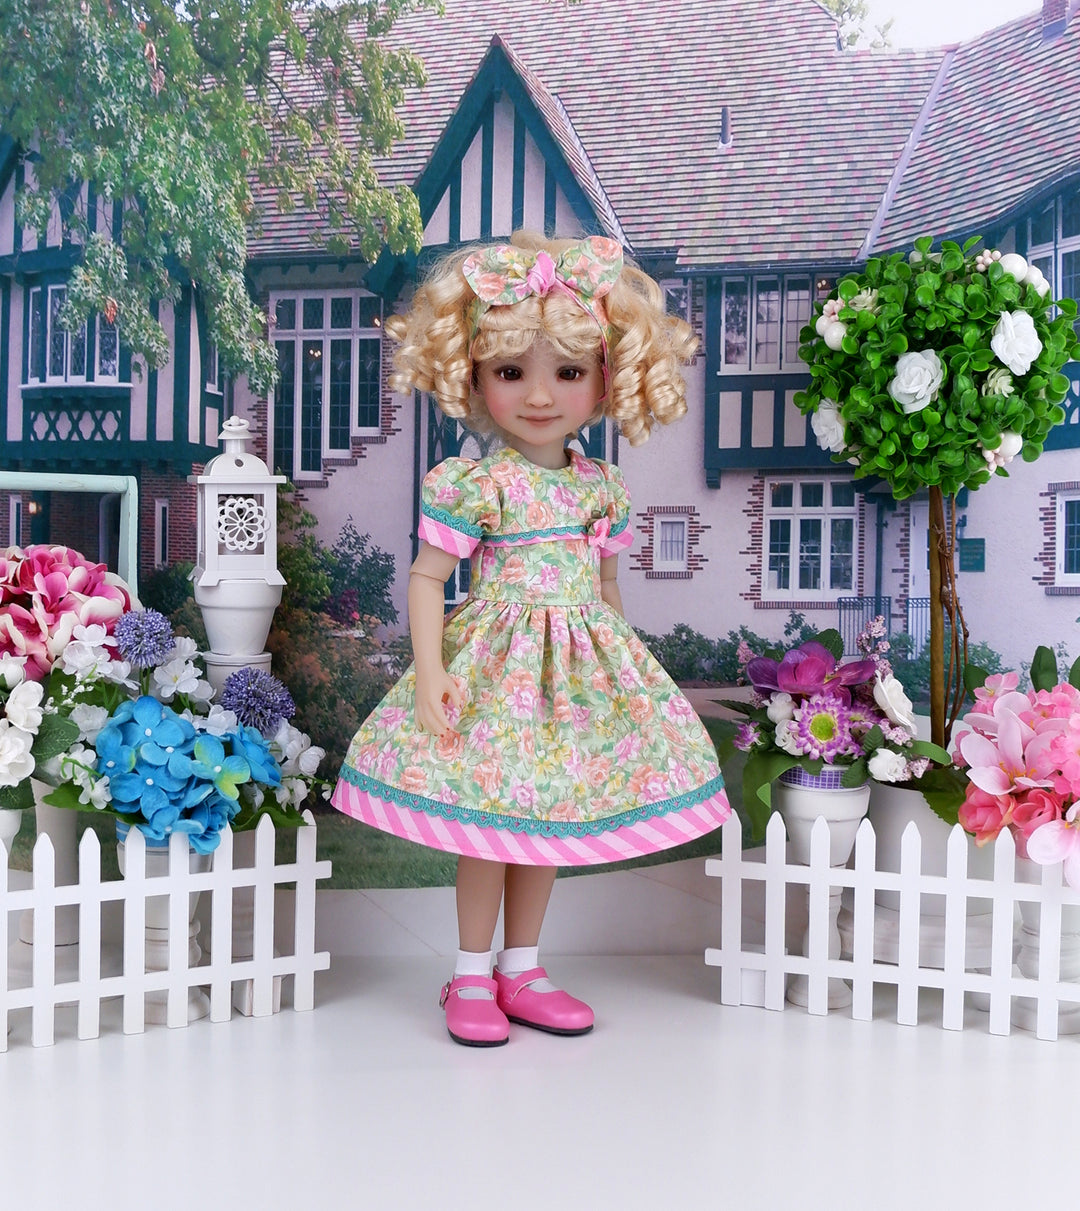 Bountiful Spring - dress and shoes for Ruby Red Fashion Friends doll